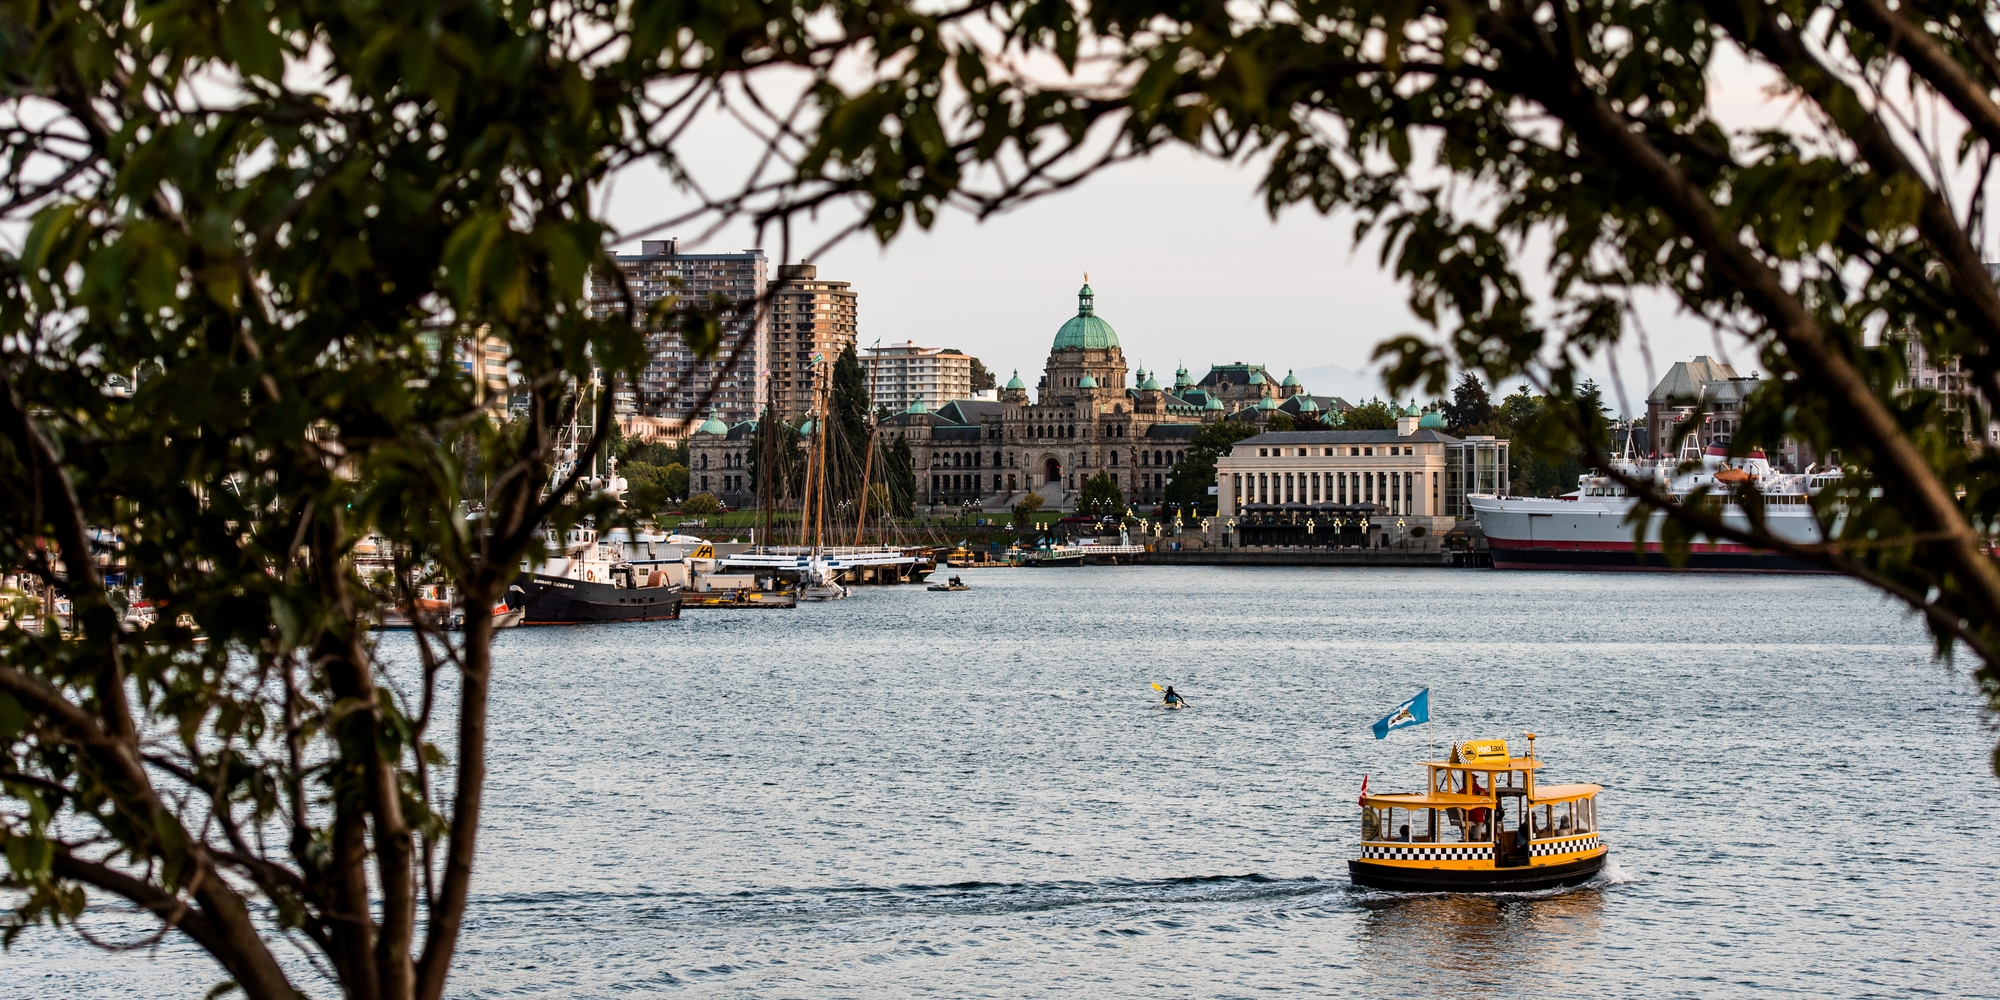 A small boat as a water taxi is crossing the harbour in Victoria. There are two trees framing the photo.